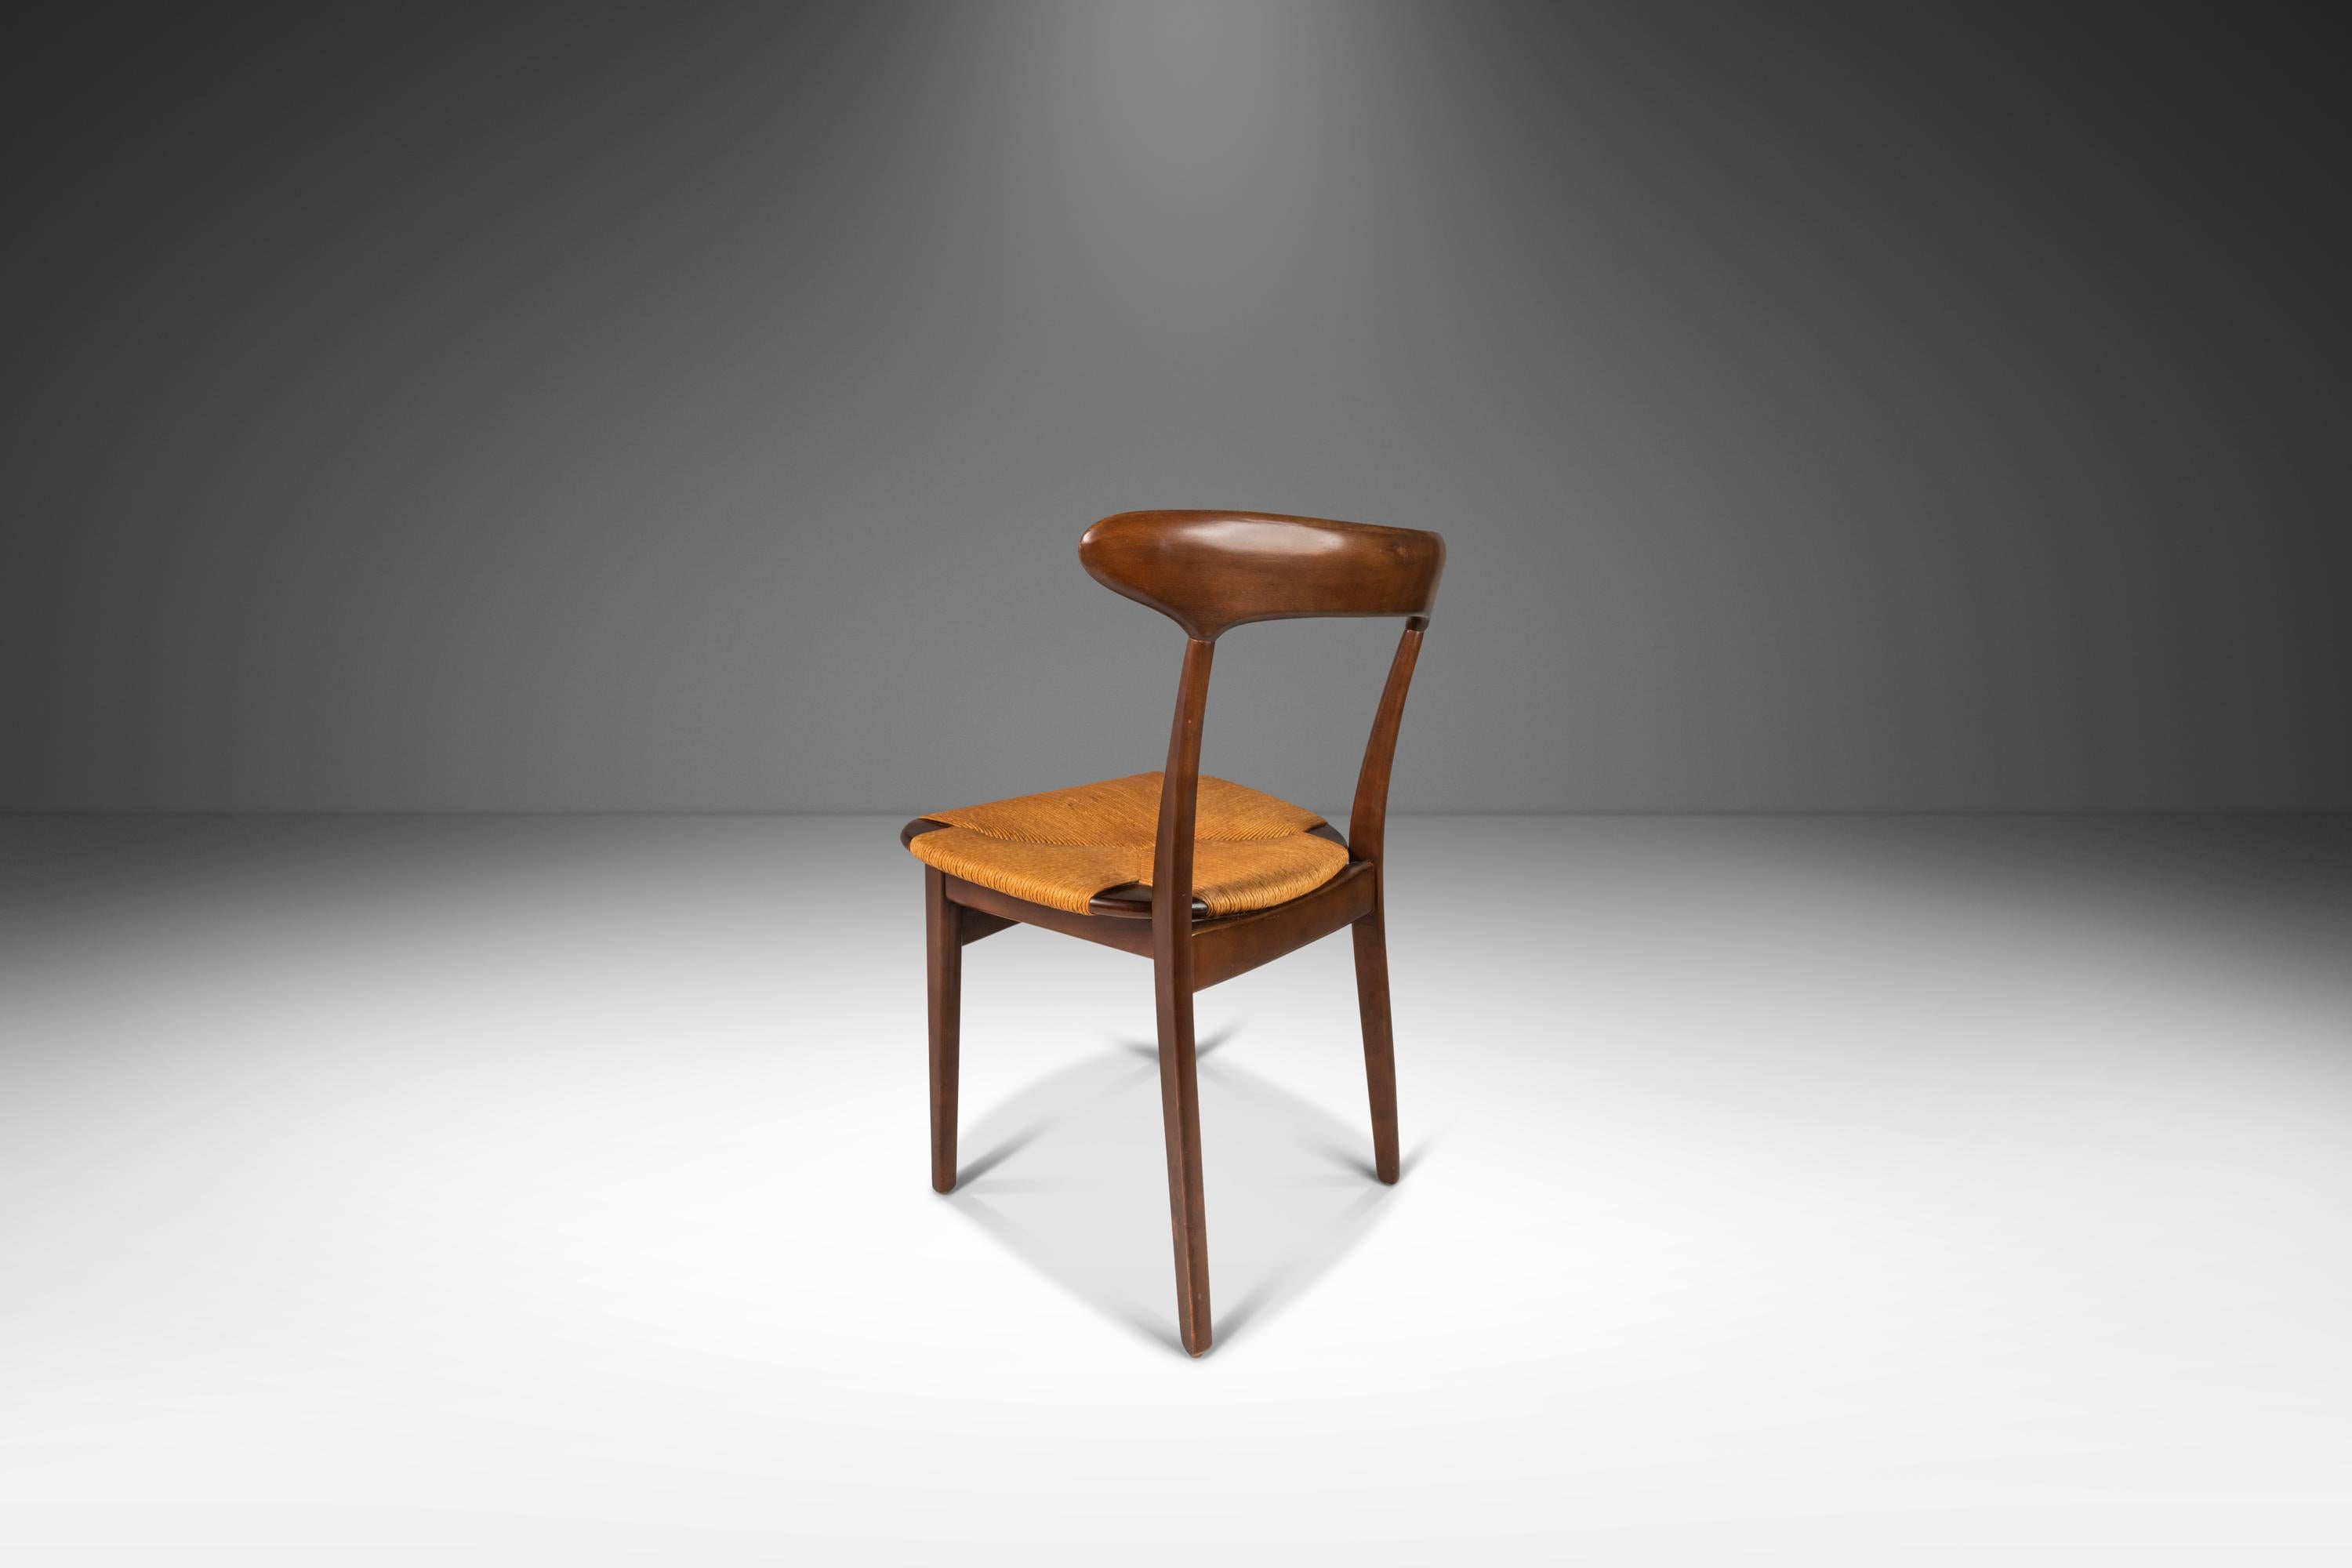 Mid-20th Century Set of Four (4) Danish Modern Thrush Dining Chairs After Hans J. Wegner, c. 1960 For Sale